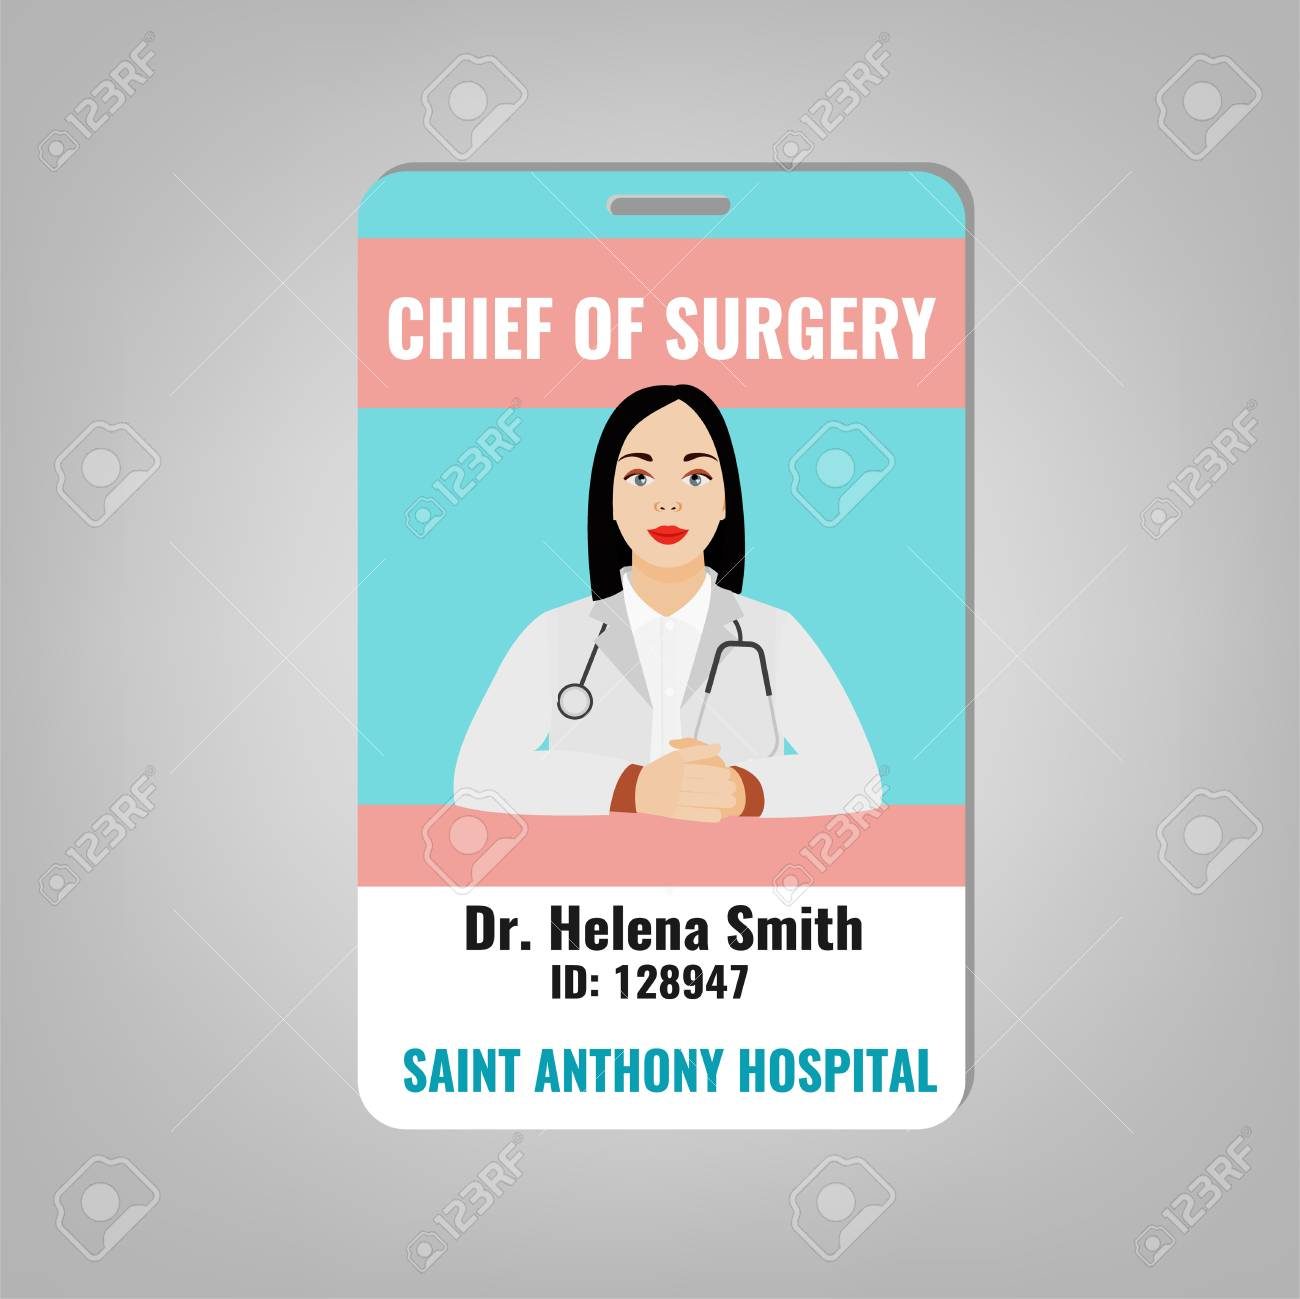 Doctors ID card with house surgeon image. Medical specialist badge template for medicine, emergency and healthcare industry. Vector ilustration isolated on a light grey background.